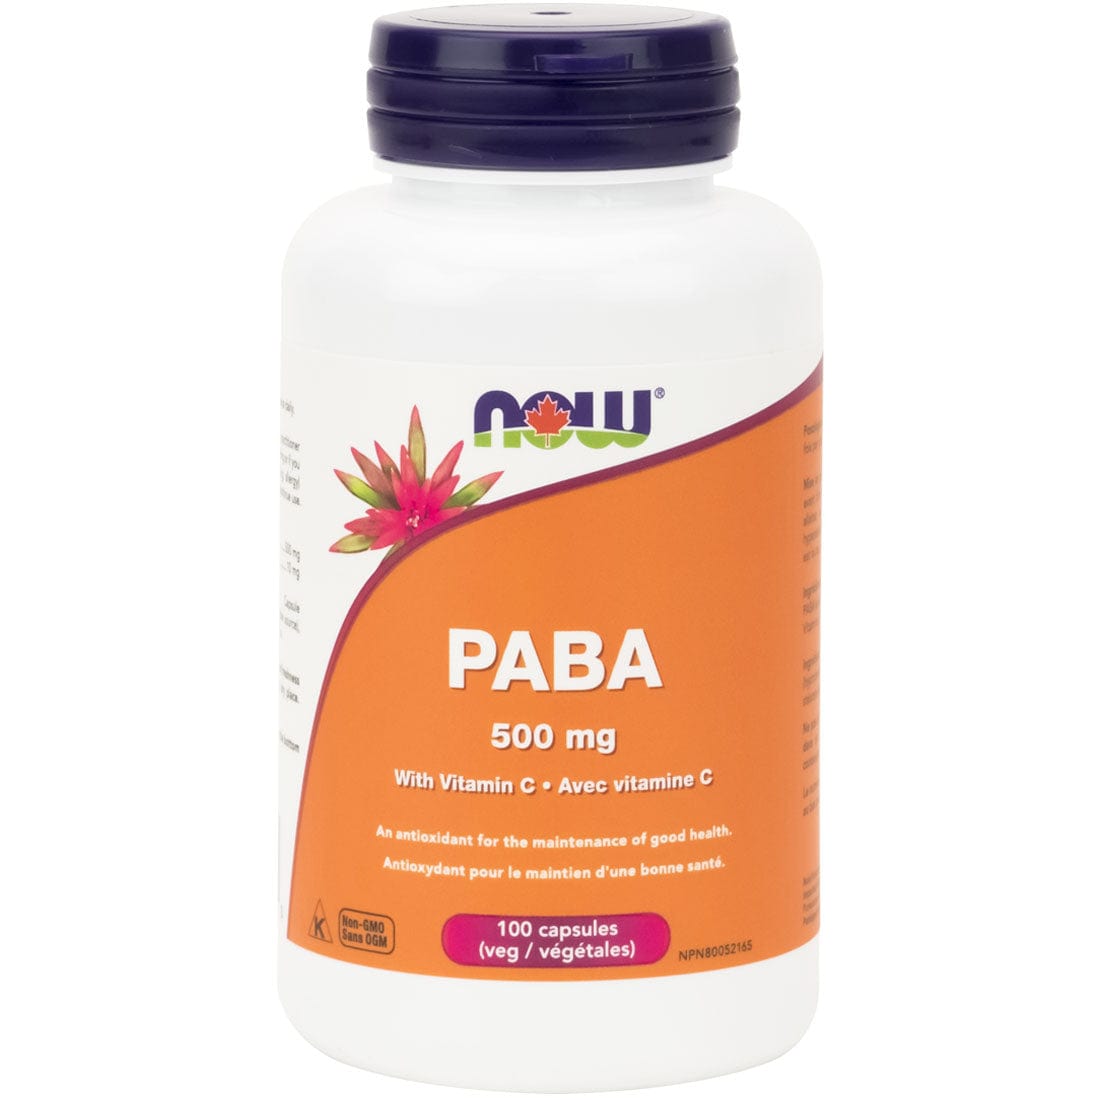 NOW PABA 500mg with Vitamin C, 100 Capsules